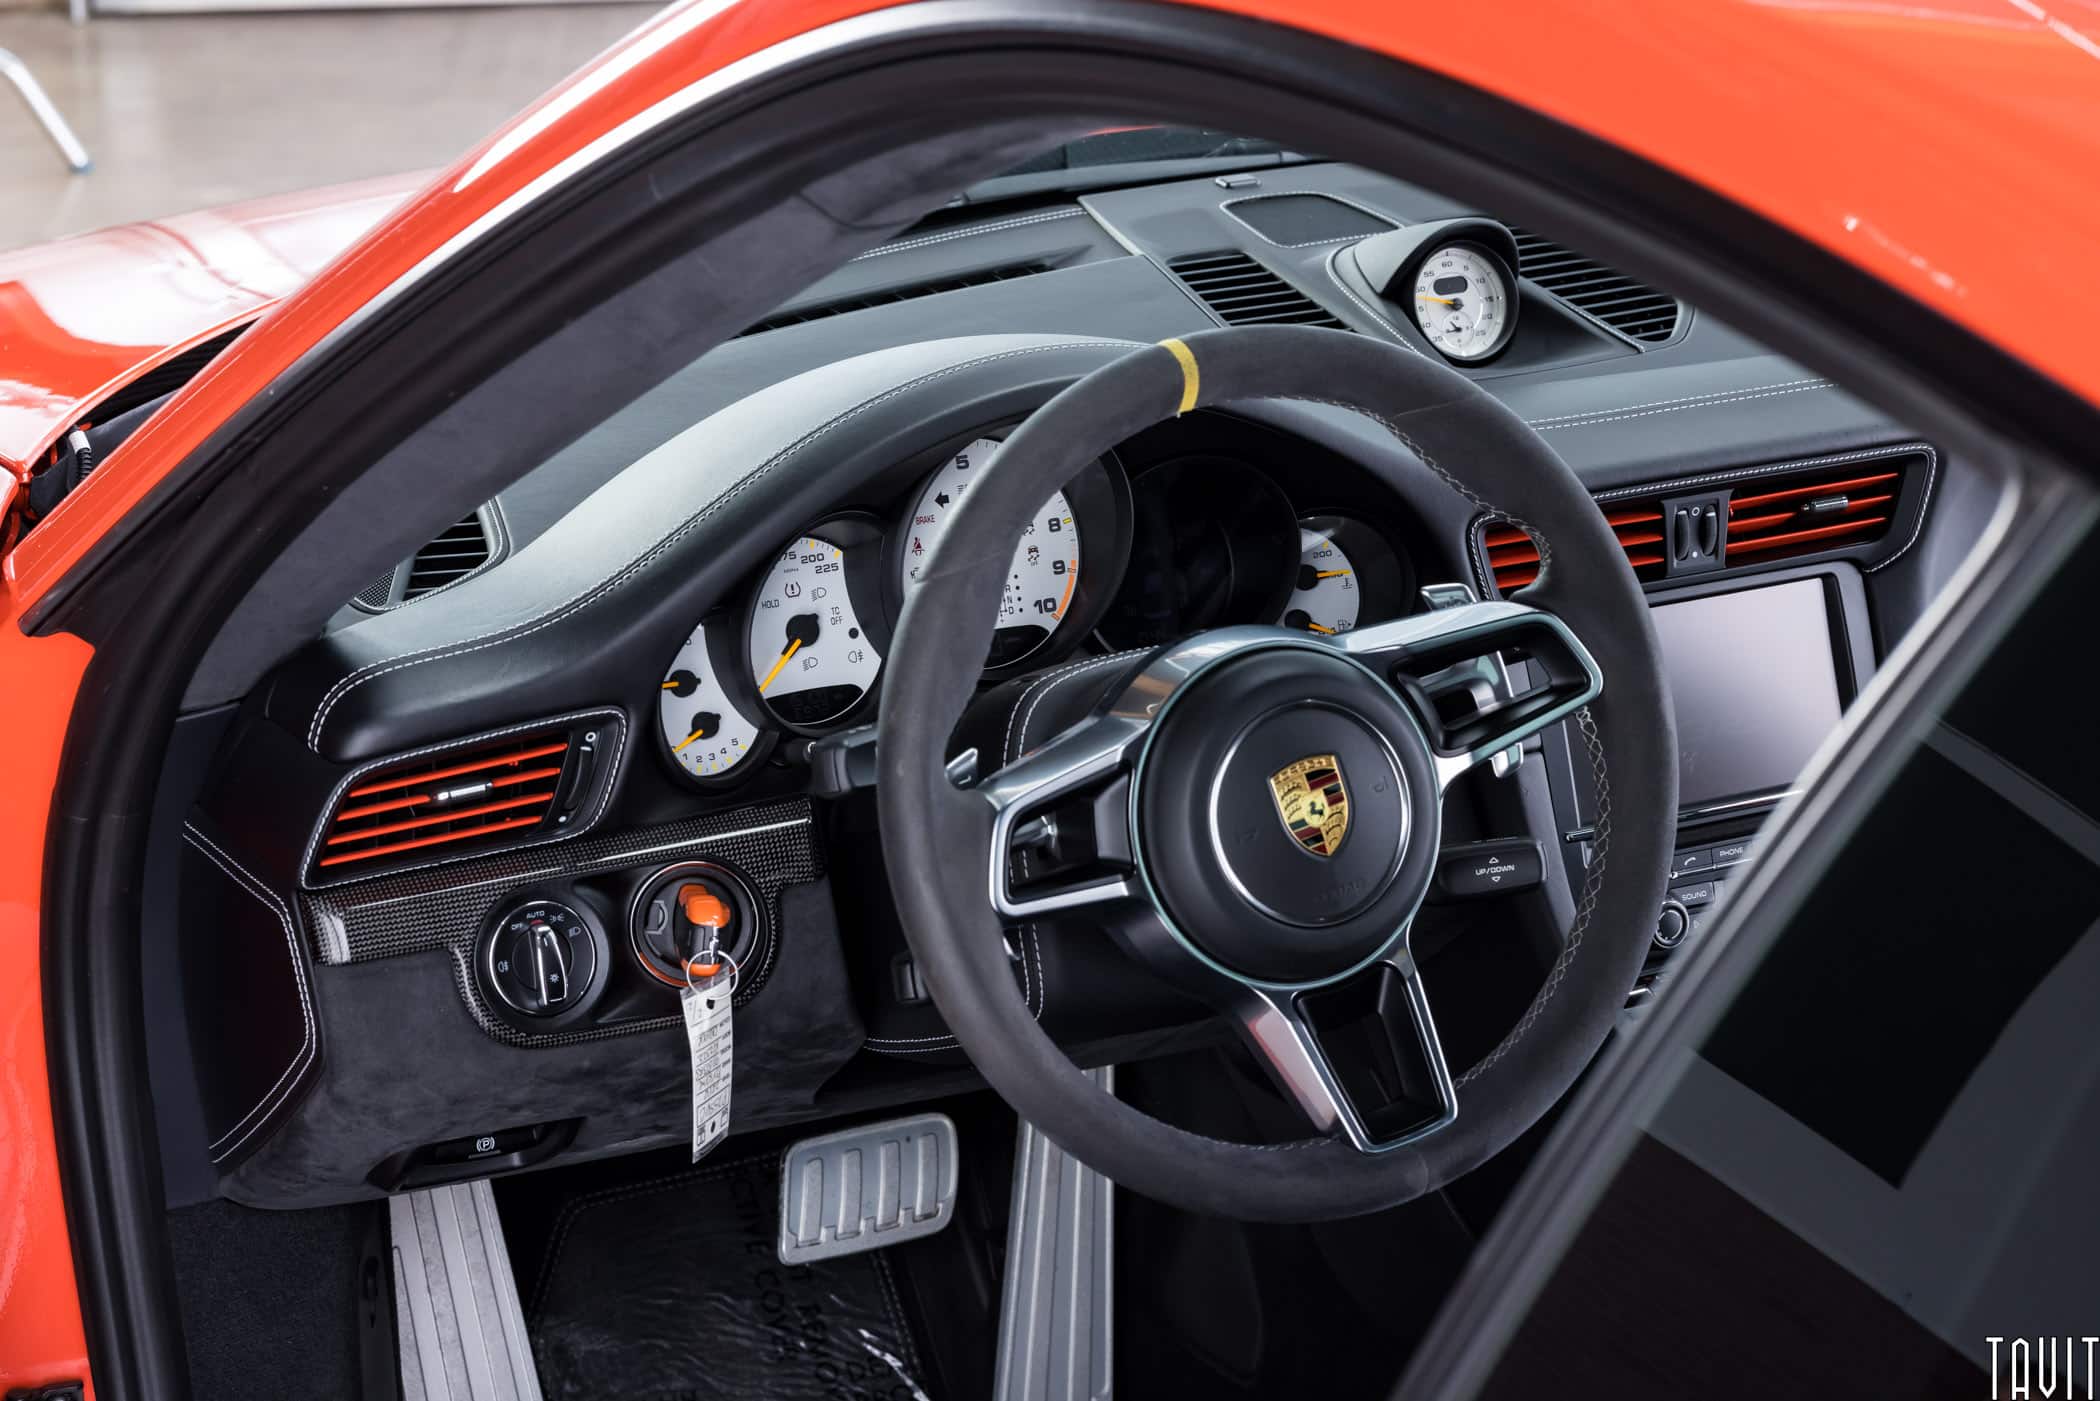 professional interior shot of red porche steering wheel